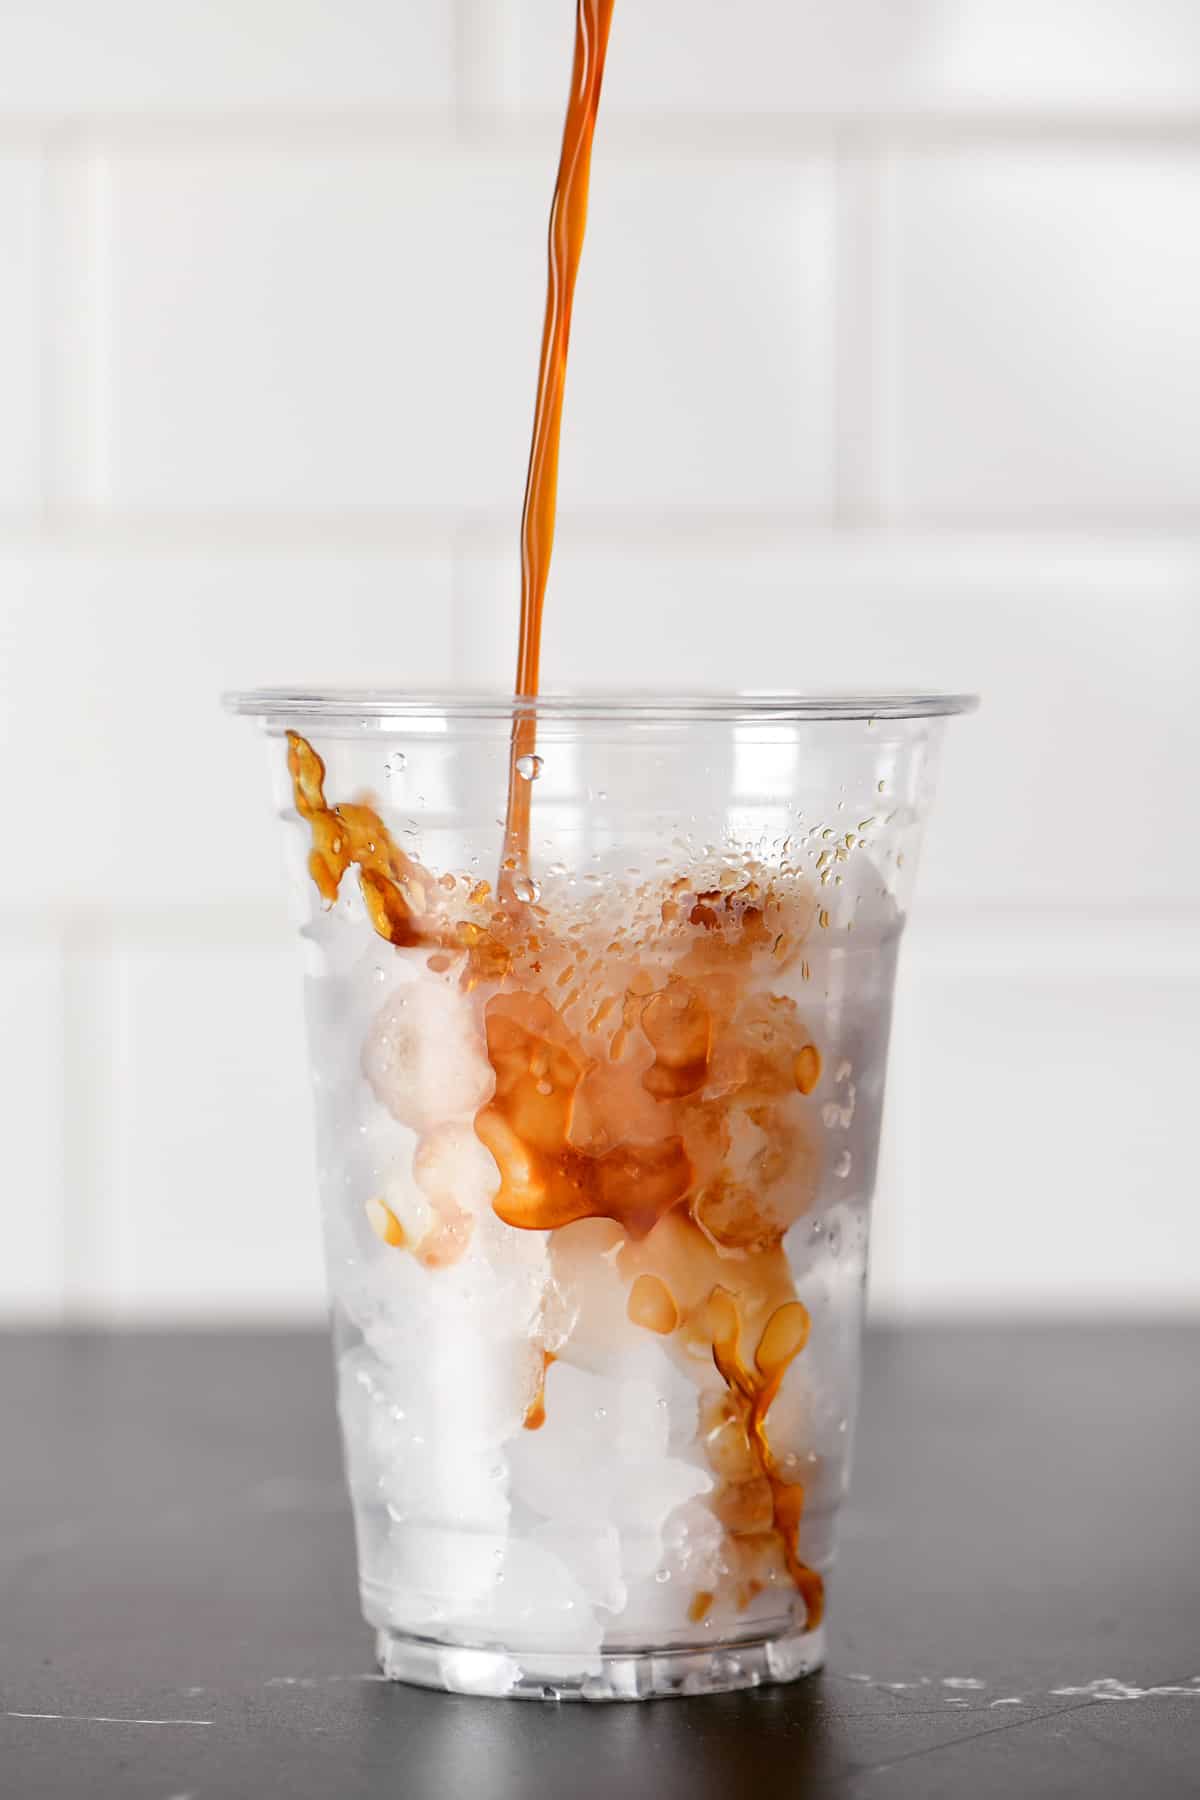 Espresso being poured over ice in a cup.